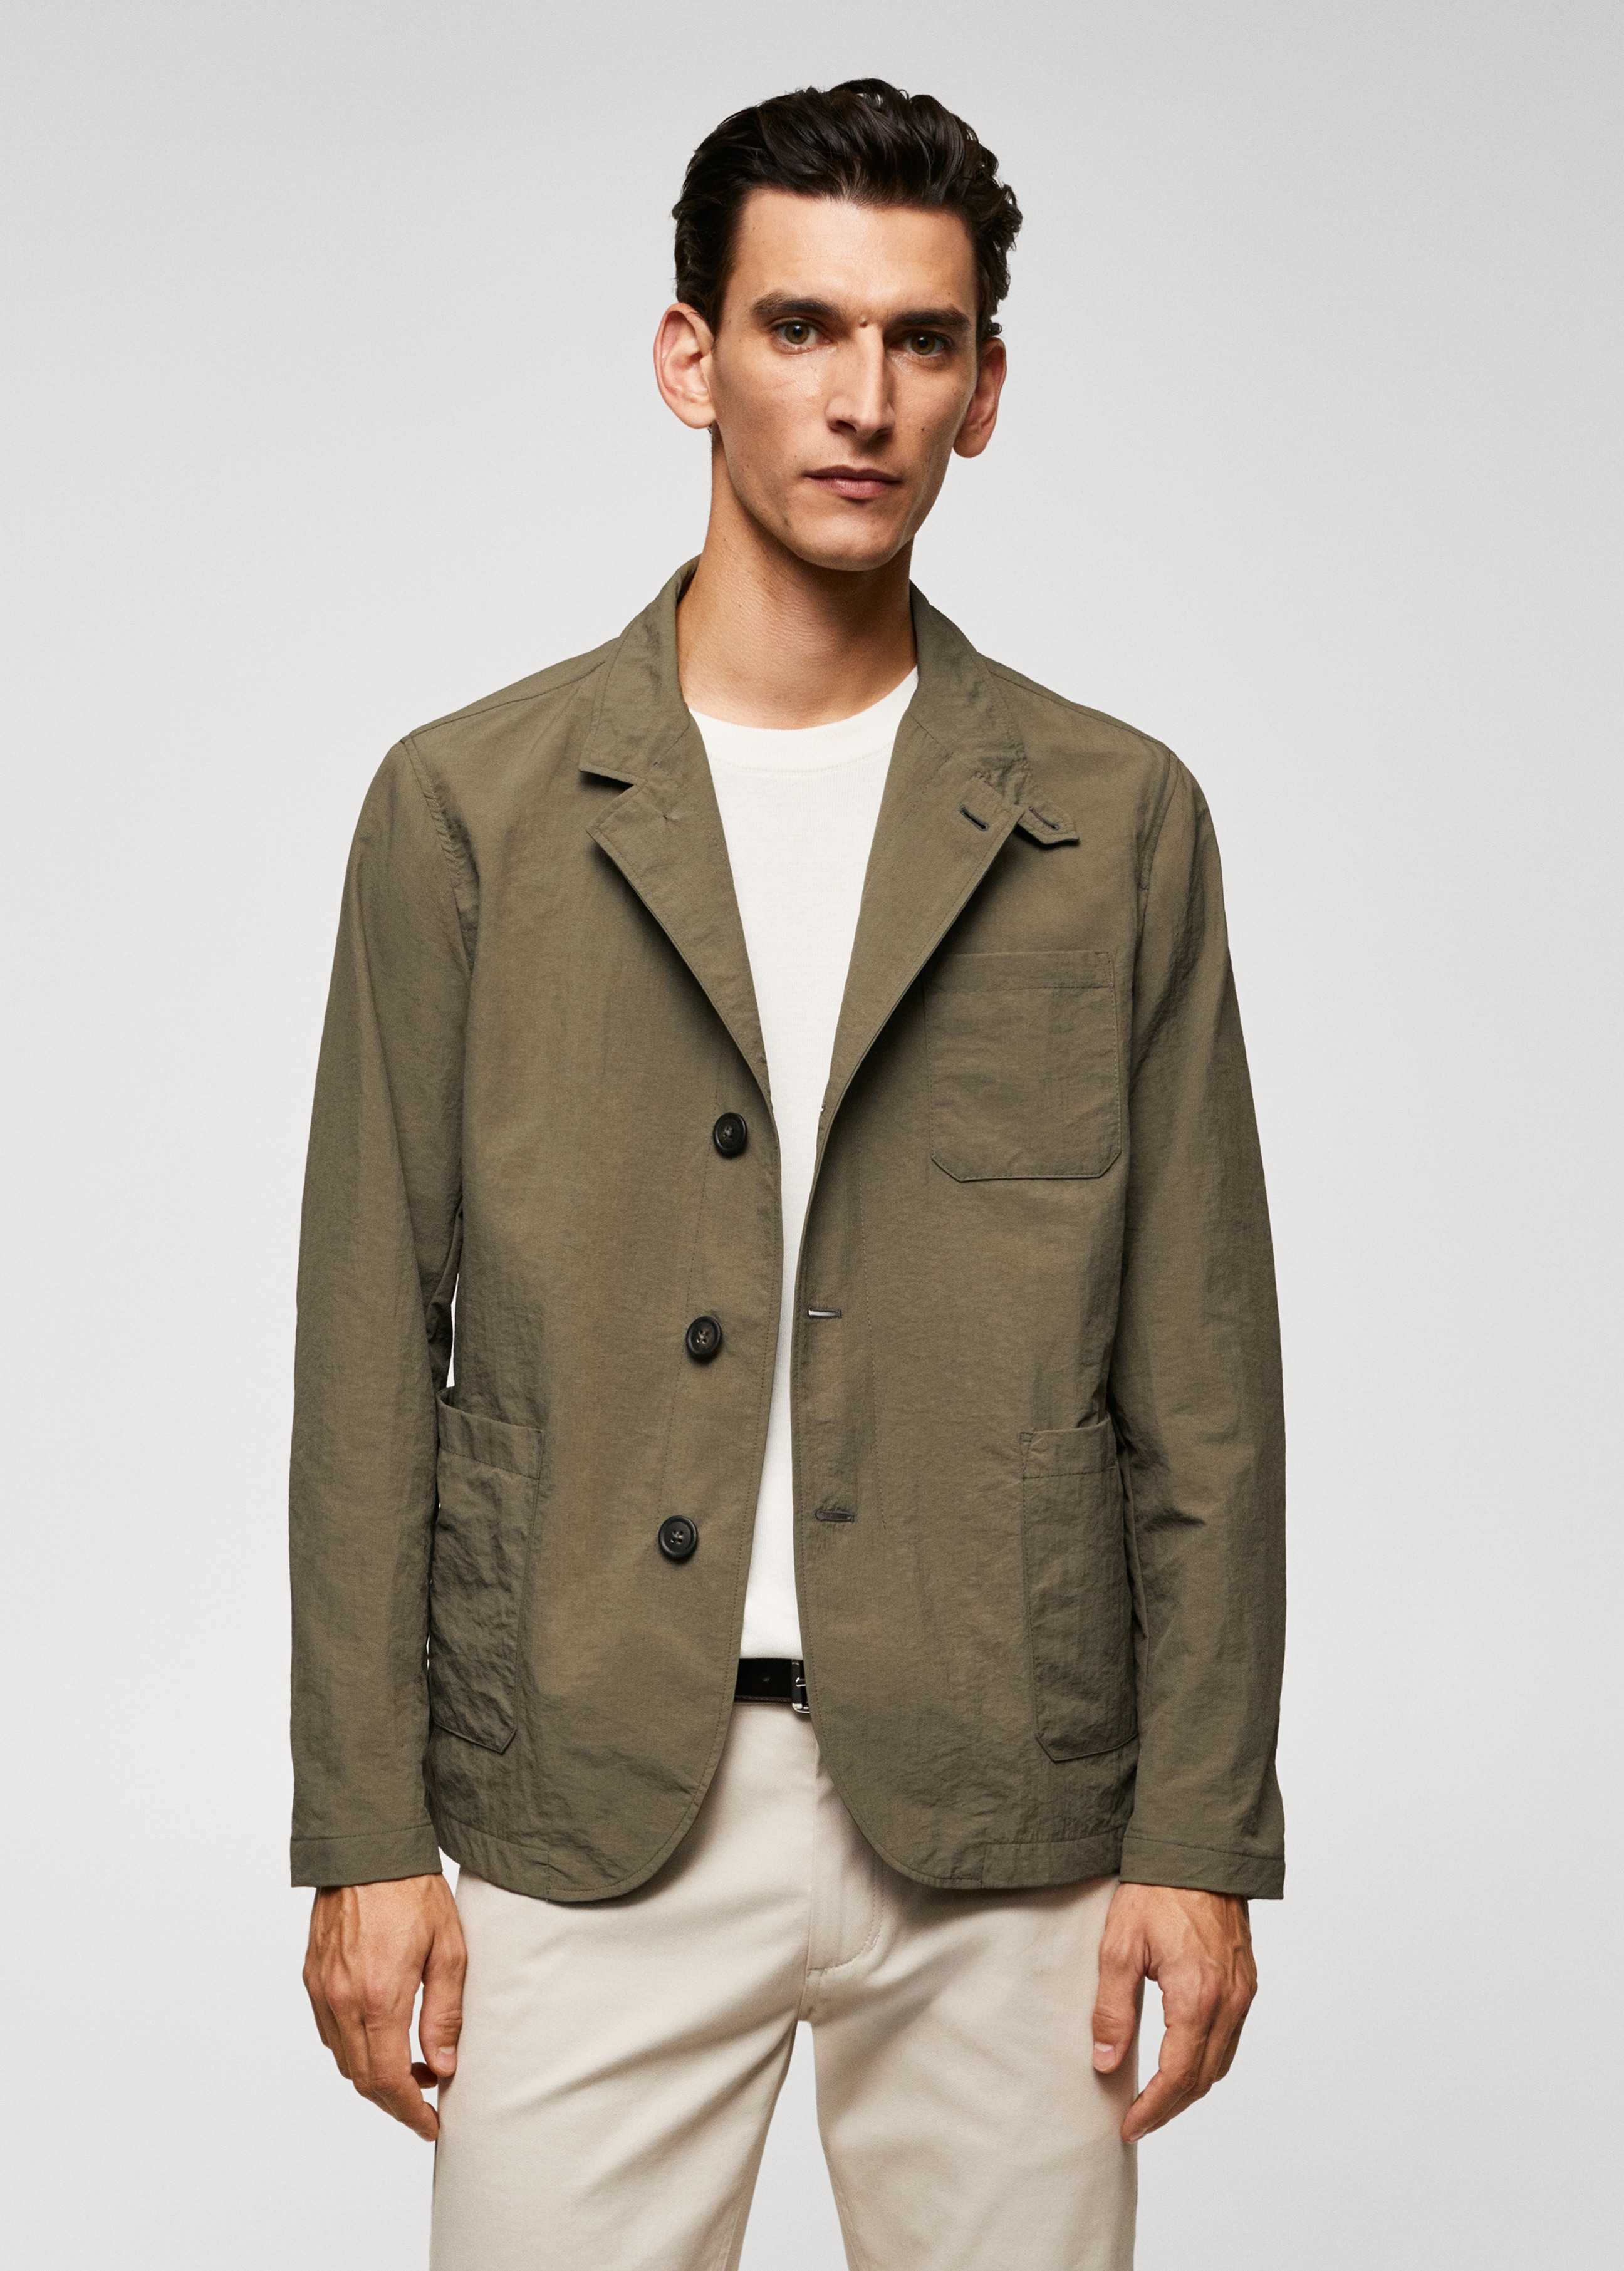 Water-repellent jacket with pockets - Medium plane